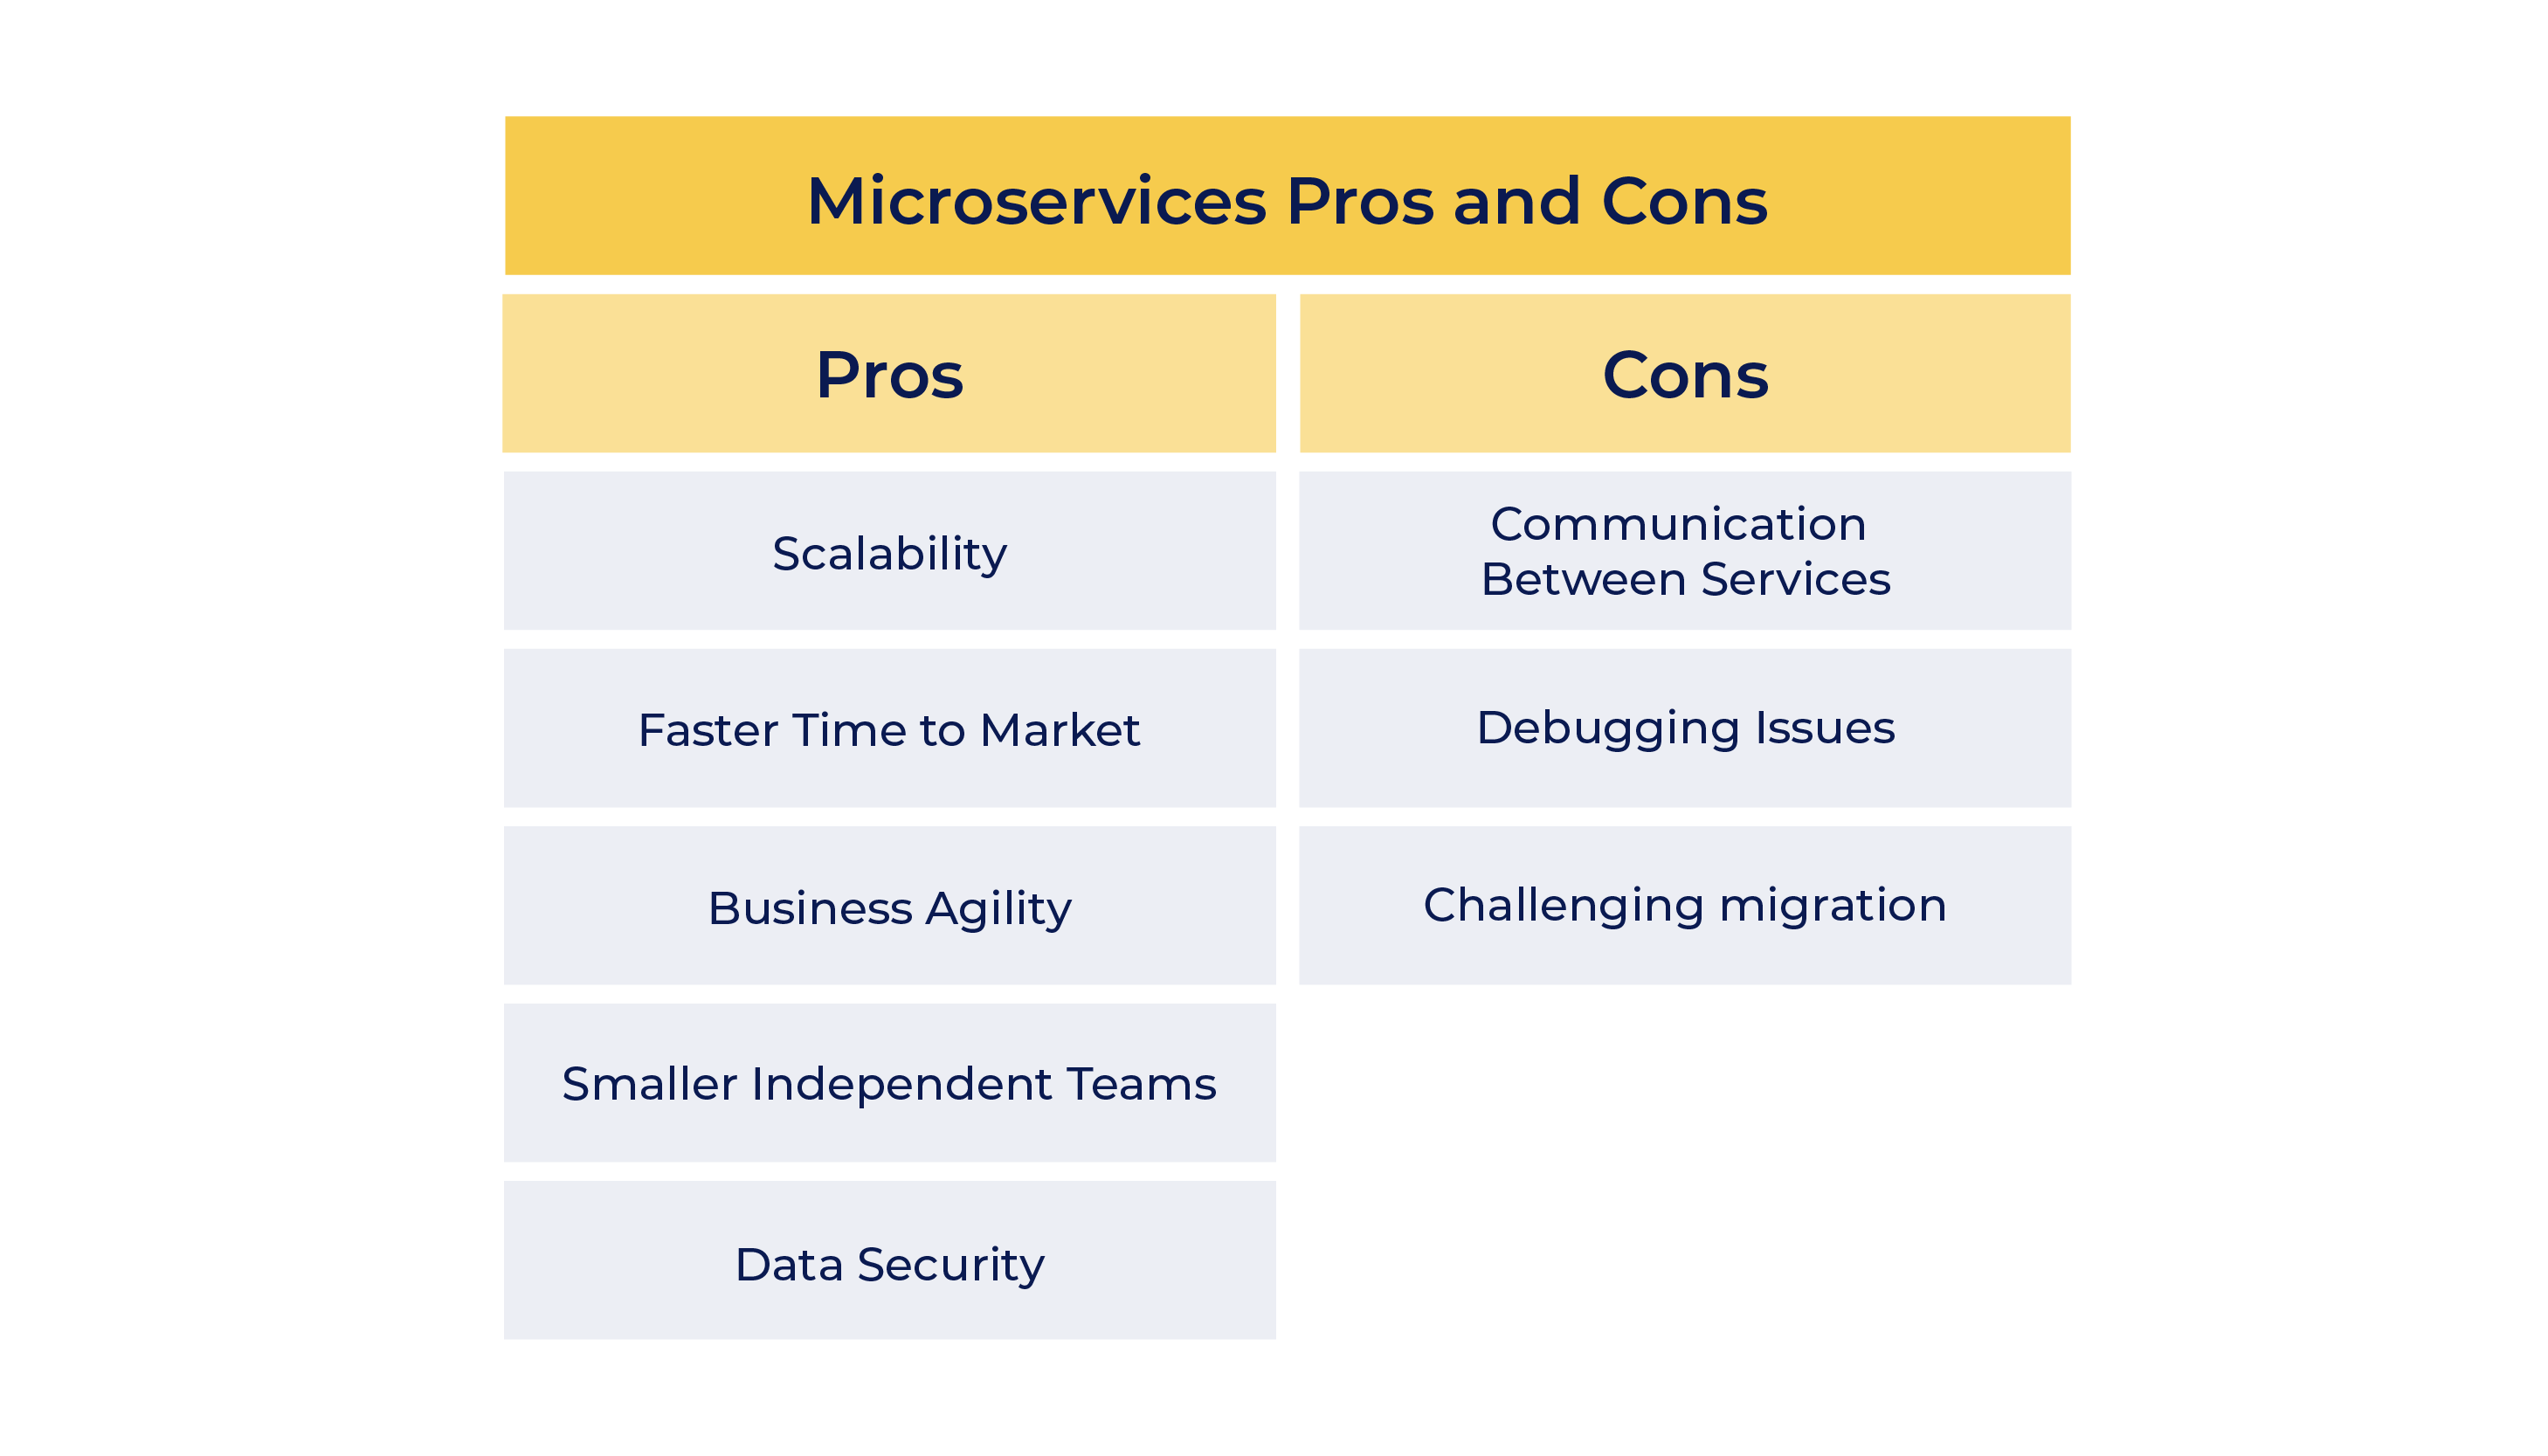 Advantages and disadvantages of microservices